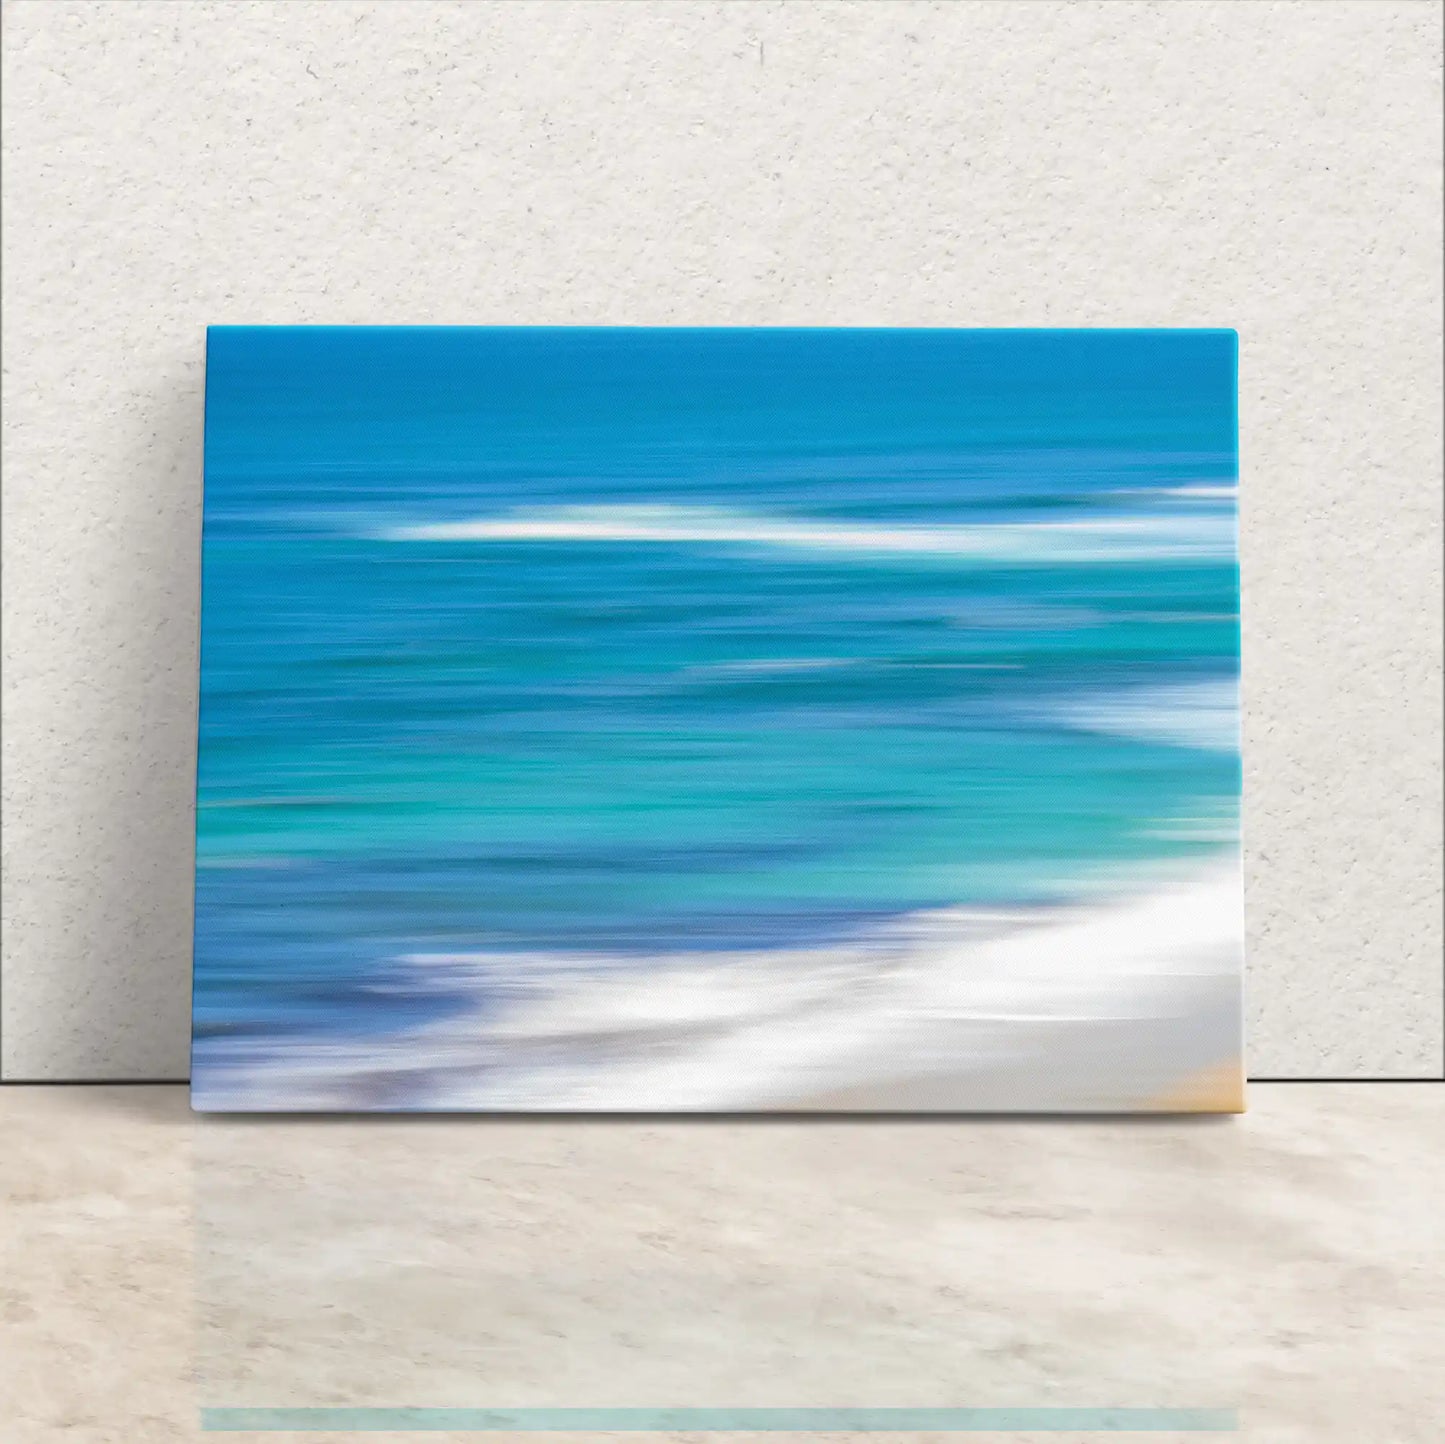 Blue Ocean abstract art on canvas leaning against wall